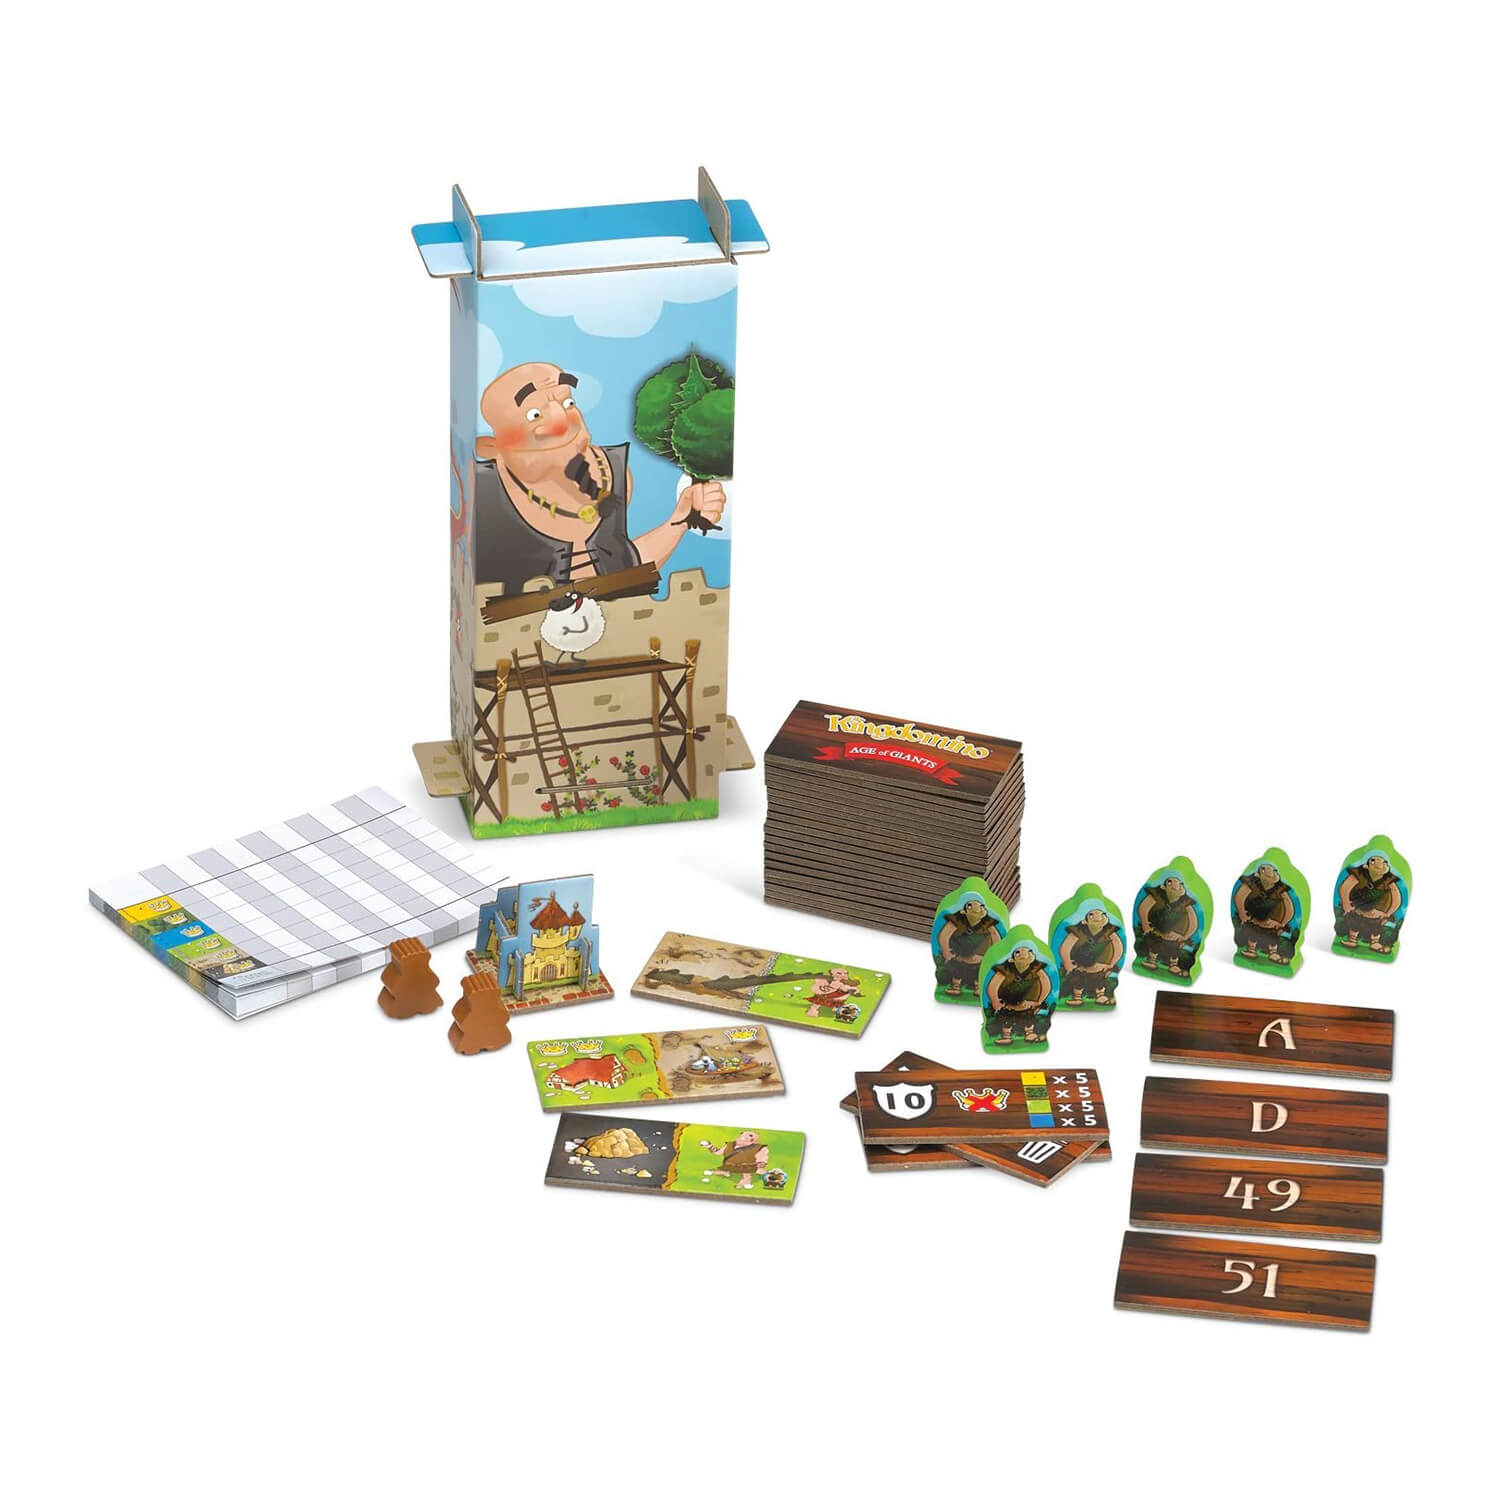 All pieces and cards included in the Blue Orange Kingdomino Age of Giants Game Expansion.